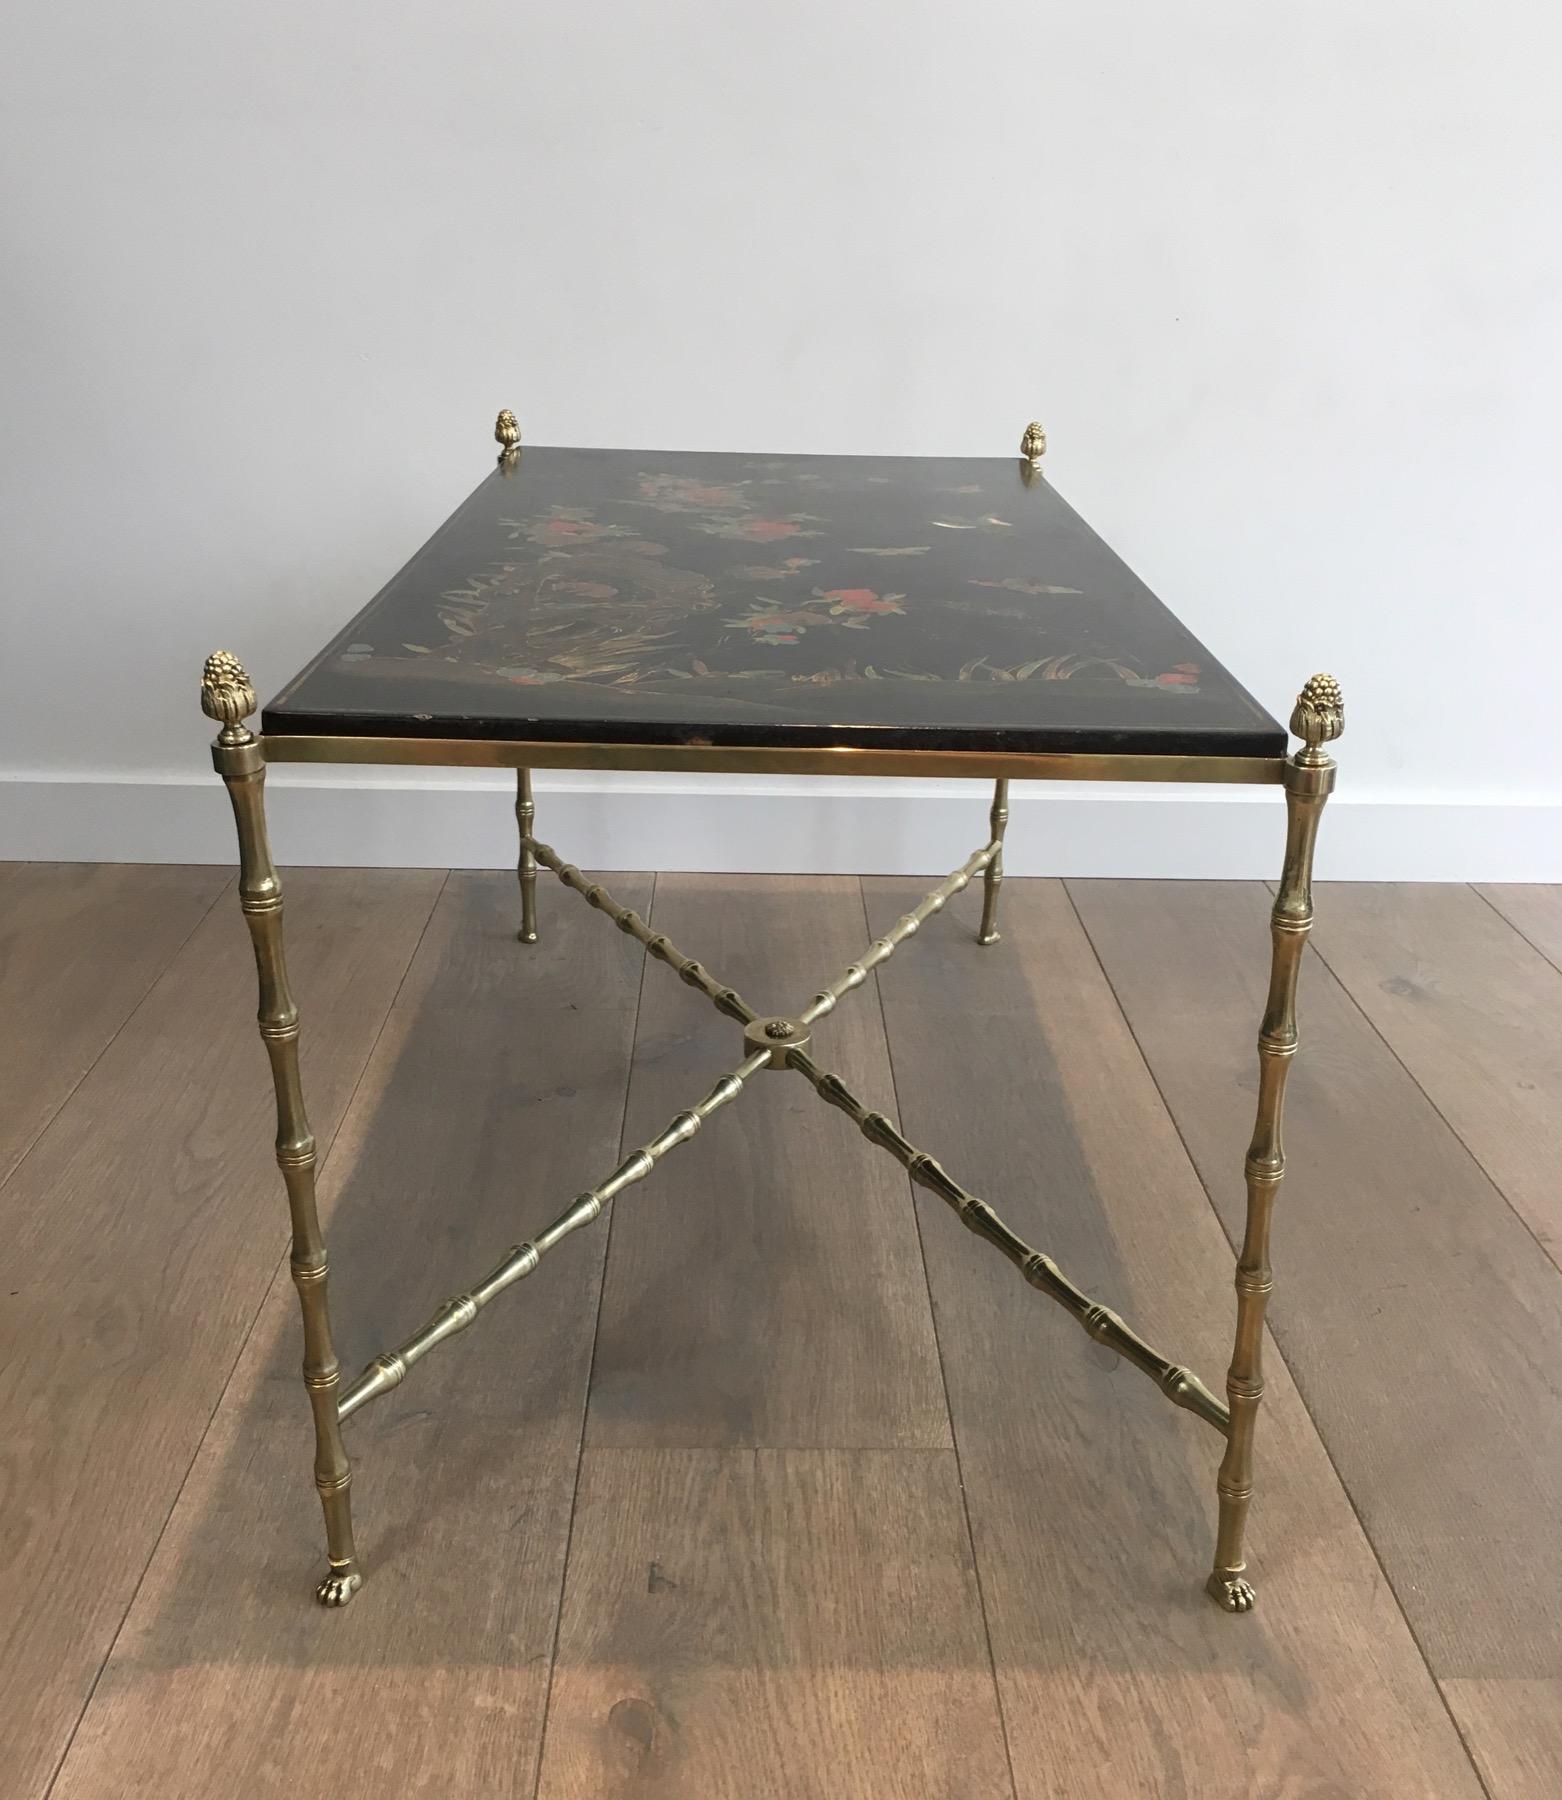 Wood Maison Bagués. Rare Neoclassical Bronze Coffee Table with Faux-Bambo